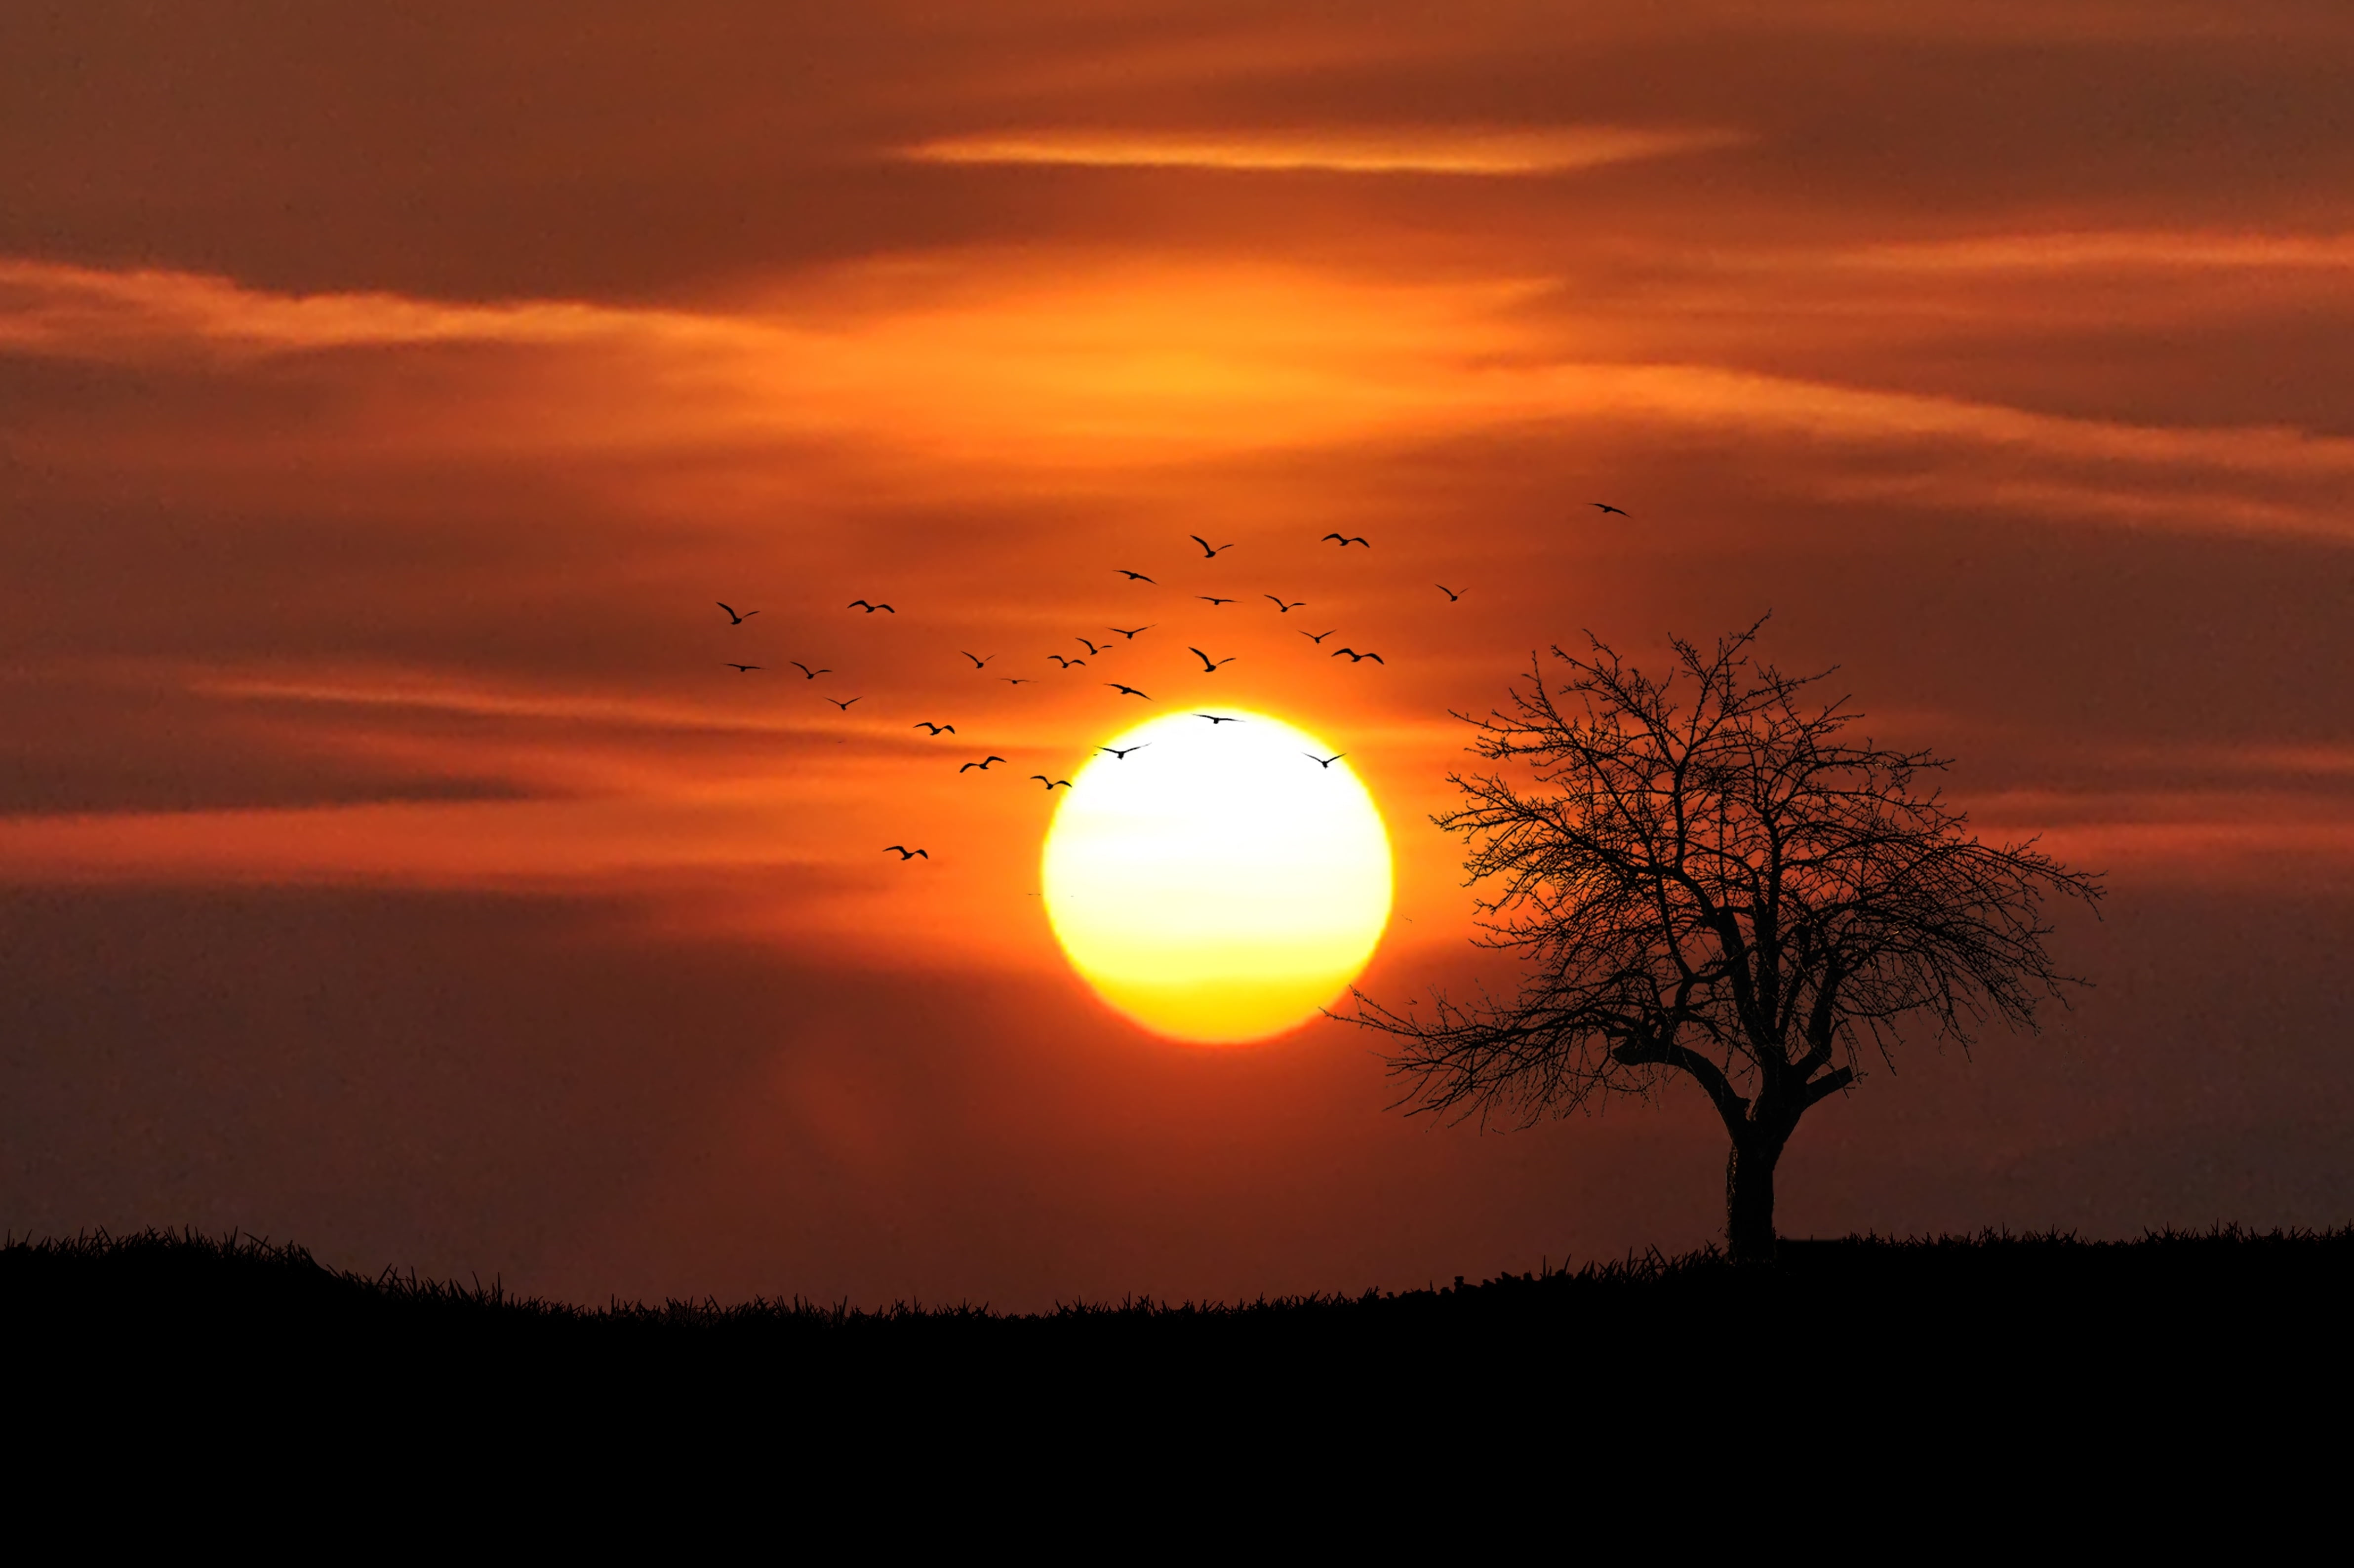 Photo of silhouette tree and flying birds near sun during golden hour ...